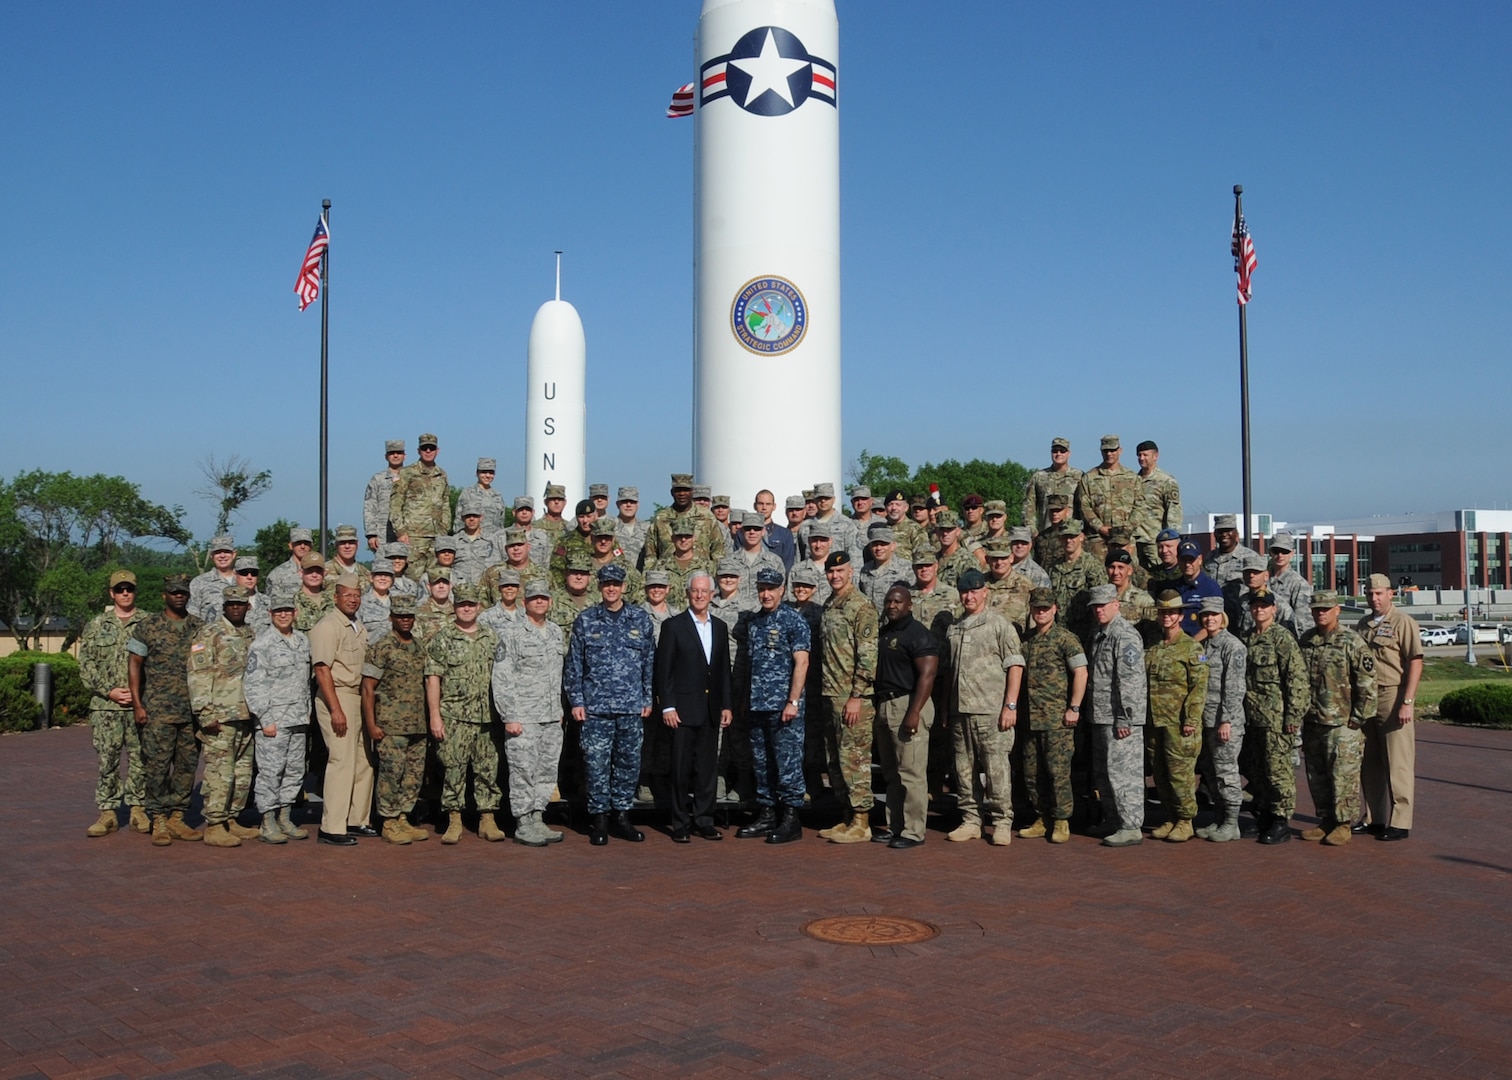 U.S. Navy Vice Adm. Charles Richard, deputy commander of U.S. Strategic Command (USSTRATCOM), and U.S. Air Force Chief Master Sgt. Patrick McMahon, senior enlisted leader of USSTRATCOM, host Keystone 18-2 participants at Offutt Air Force Base, Neb., June 12, 2018. The Keystone course educates command senior enlisted leaders (CSELs) who currently, or will, serve in a general or flag officer-level headquarters. CSELs in the Keystone course visit combatant commands and receive briefings to understand their missions, roles, responsibilities and organizational structures. U.S. Strategic Command has global responsibilities assigned through the Unified Command Plan that include strategic deterrence, nuclear operations, space operations, joint electromagnetic spectrum operations, global strike, missile defense, and analysis and targeting.